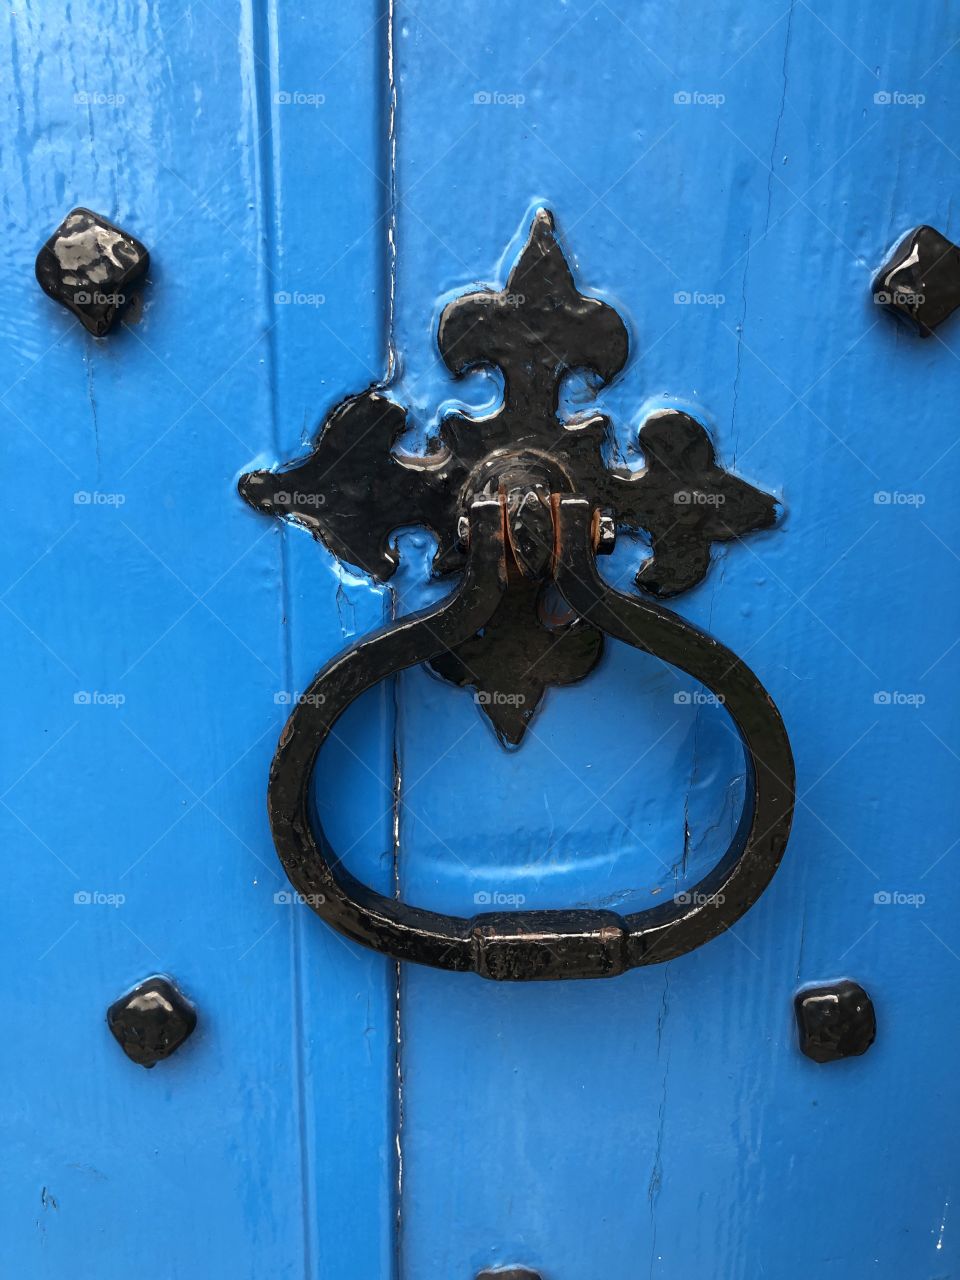 This very sturdy “door knocker”, is used for opening one of the doors of the local Somerset church